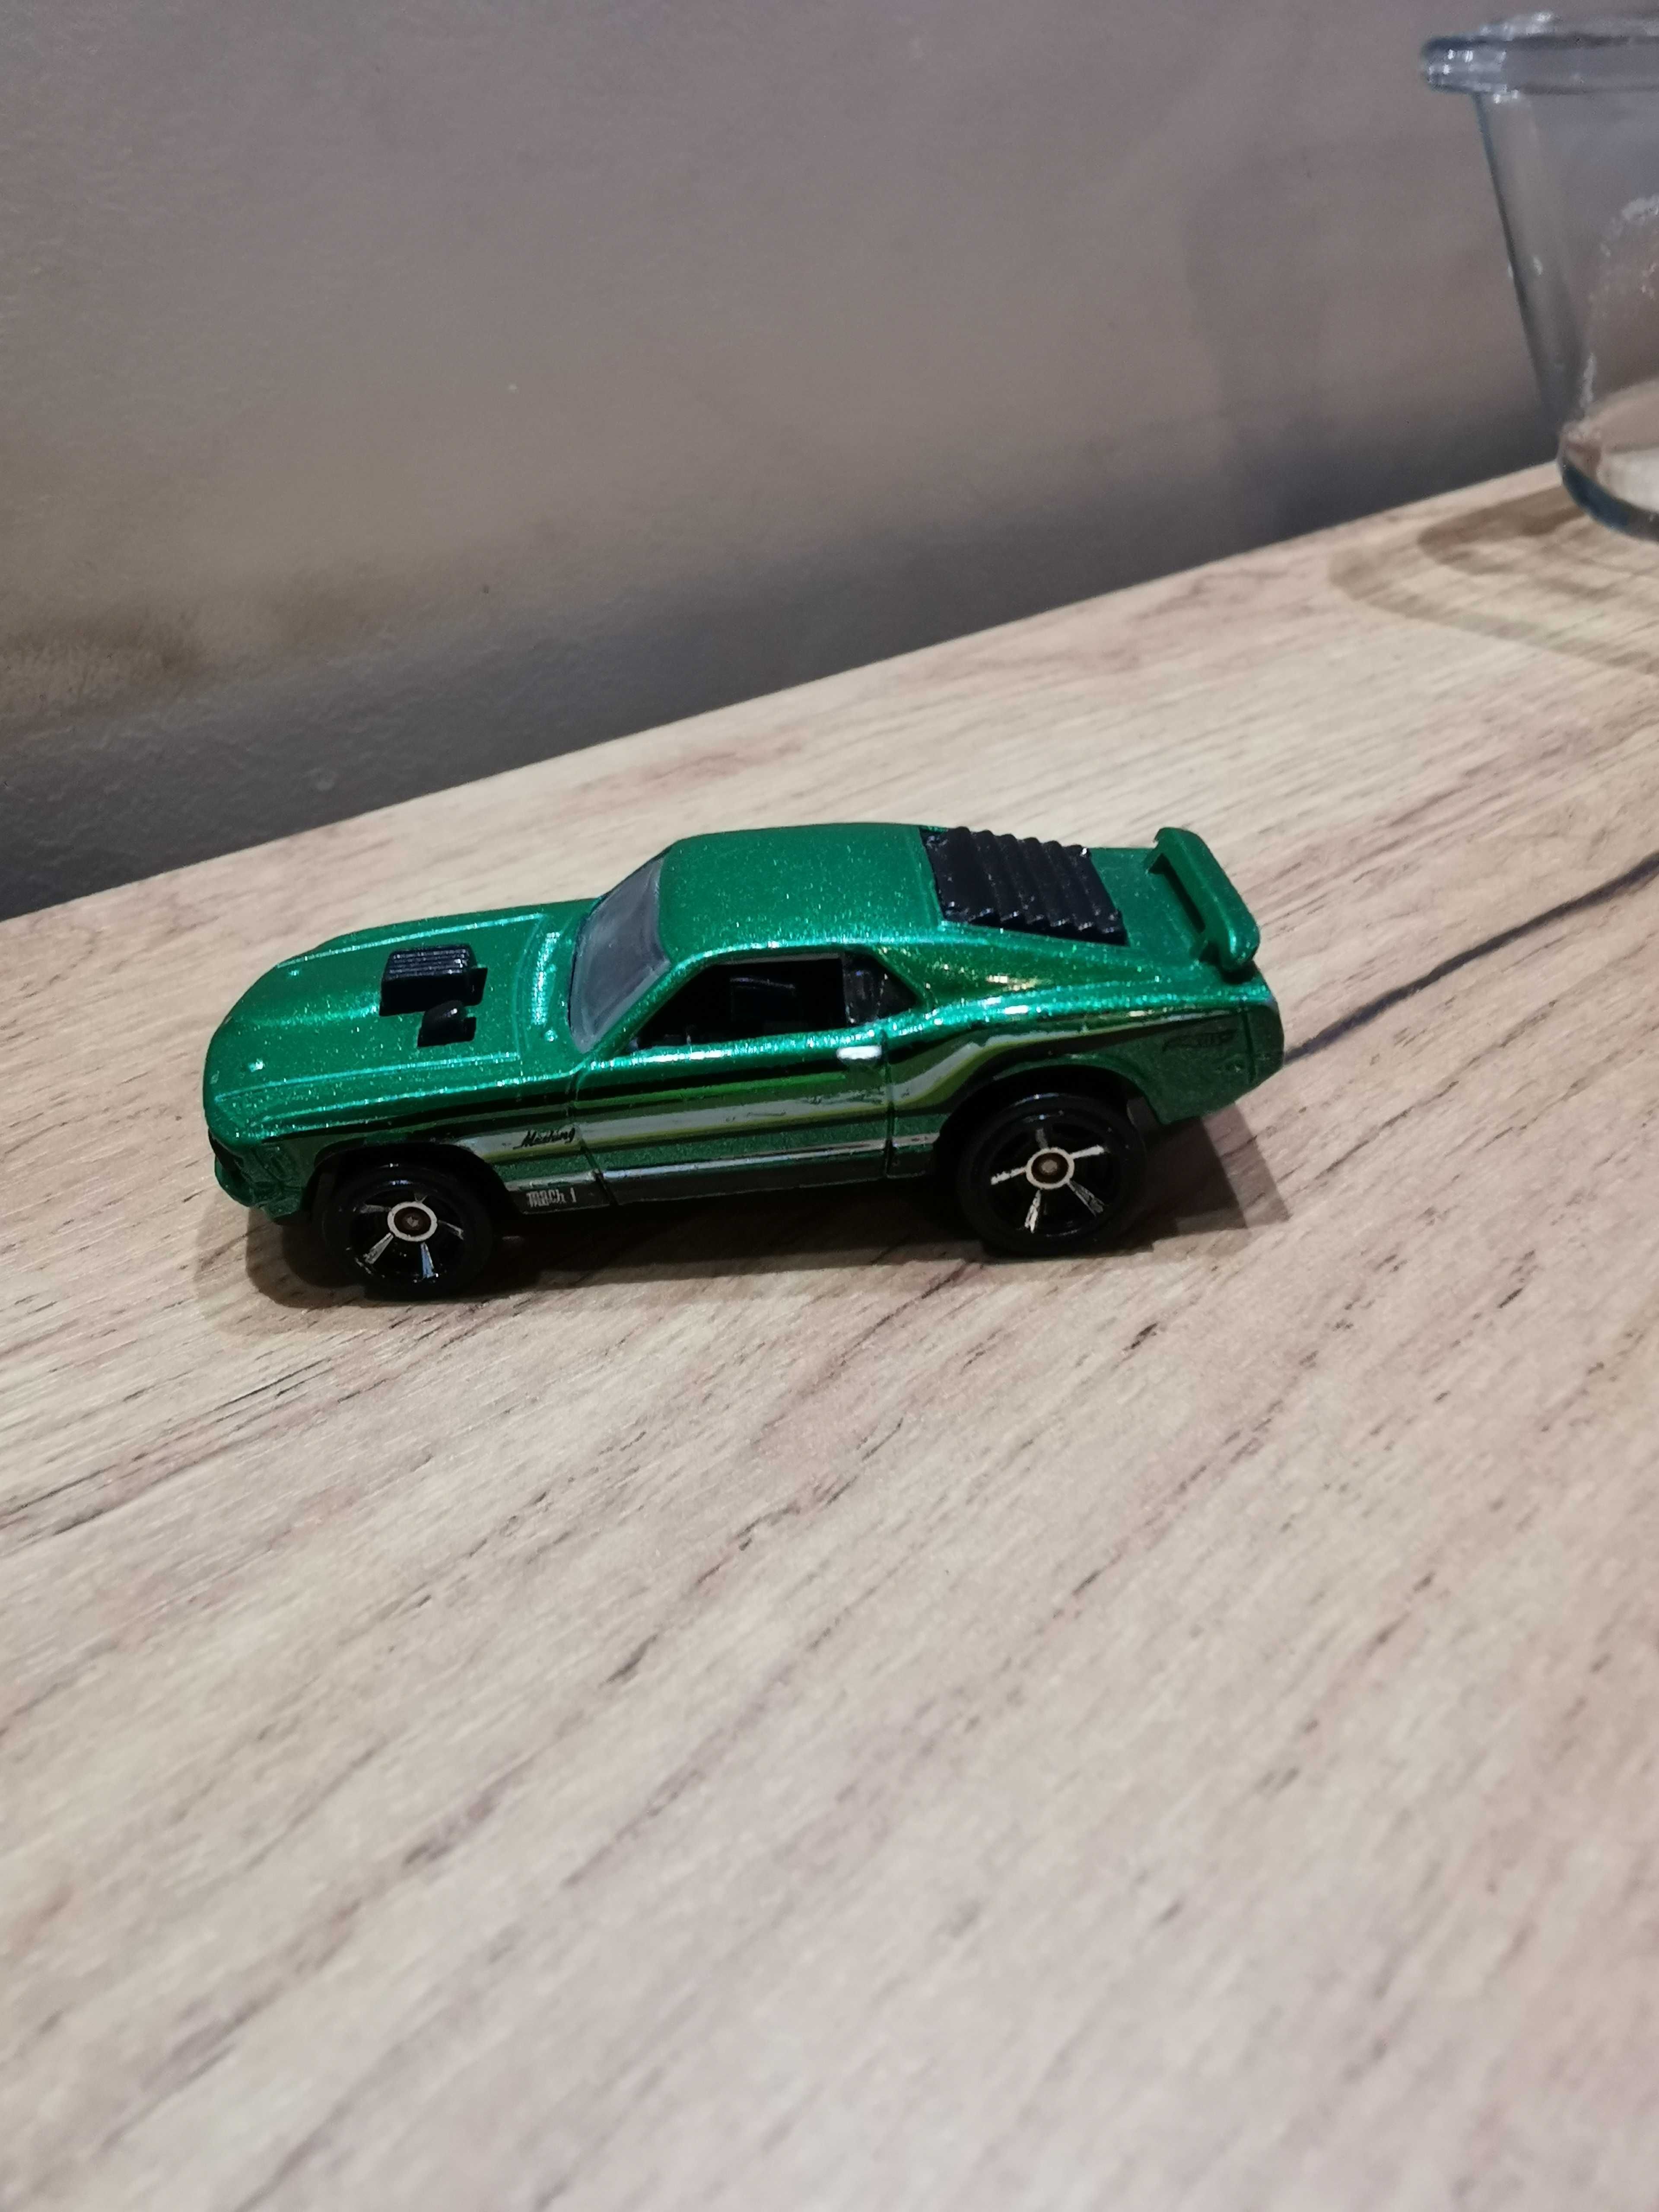 Hot wheels Ford Mustang Mach 1